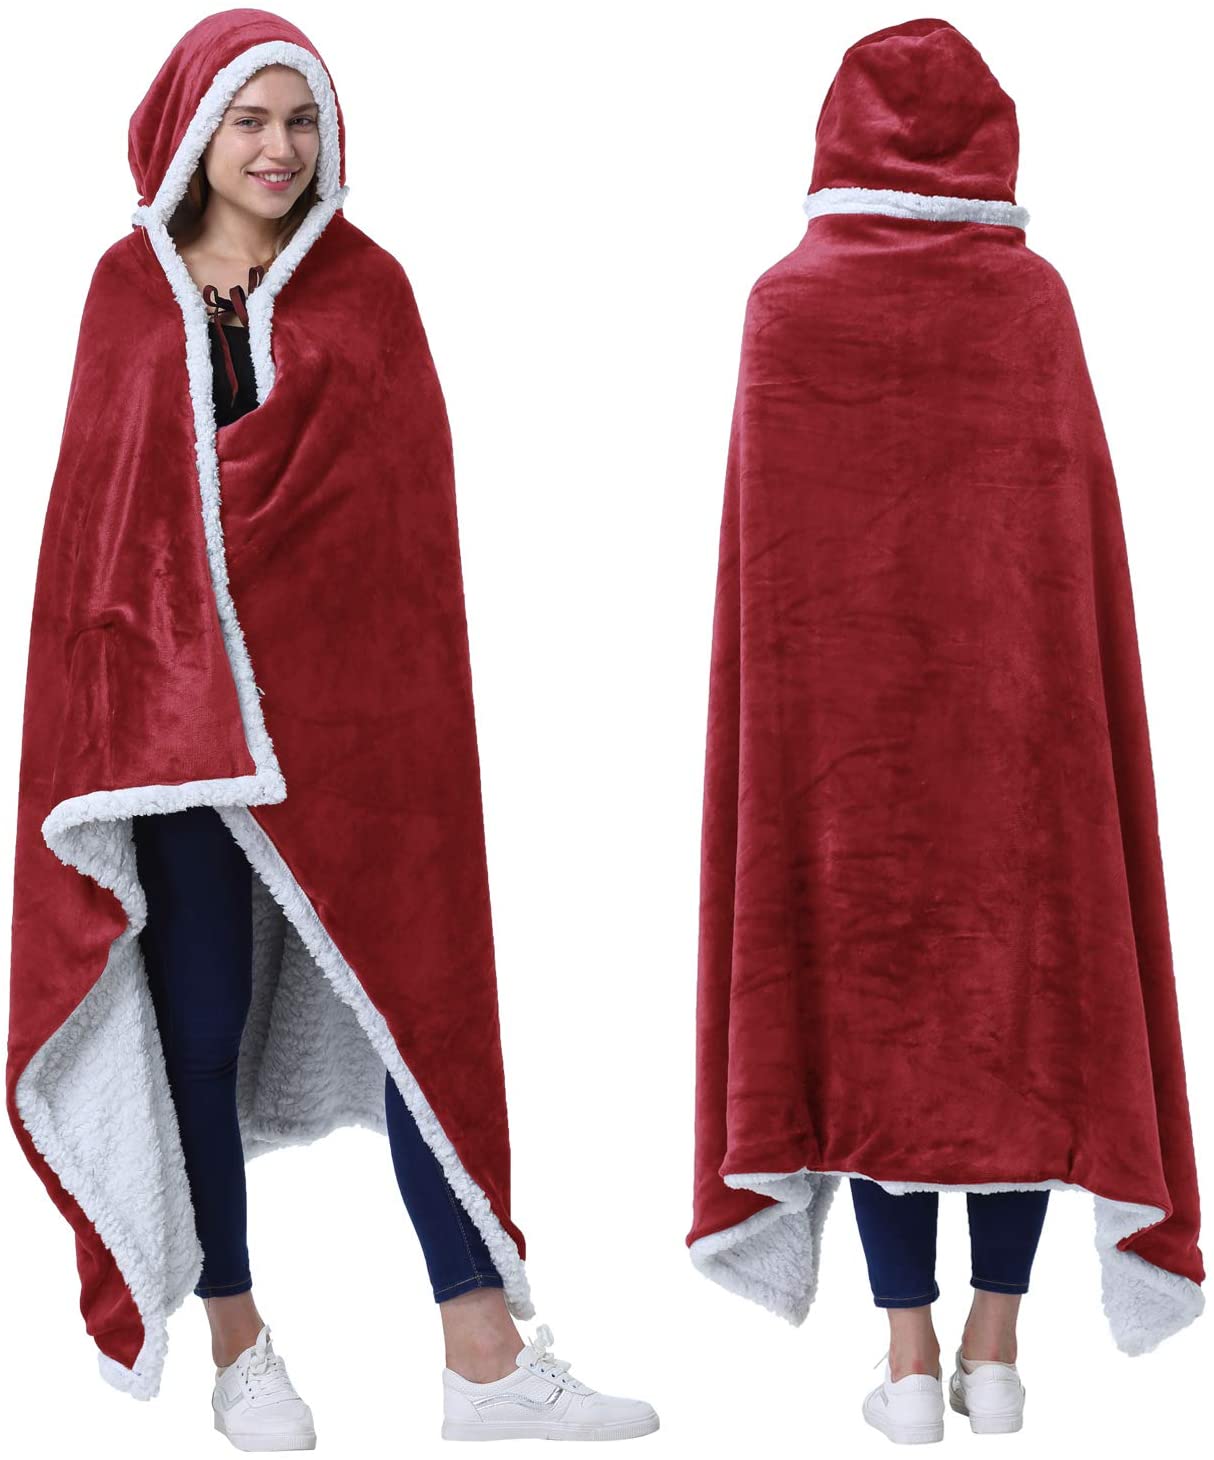 Catalonia One-Size Snuggling Hooded Blanket